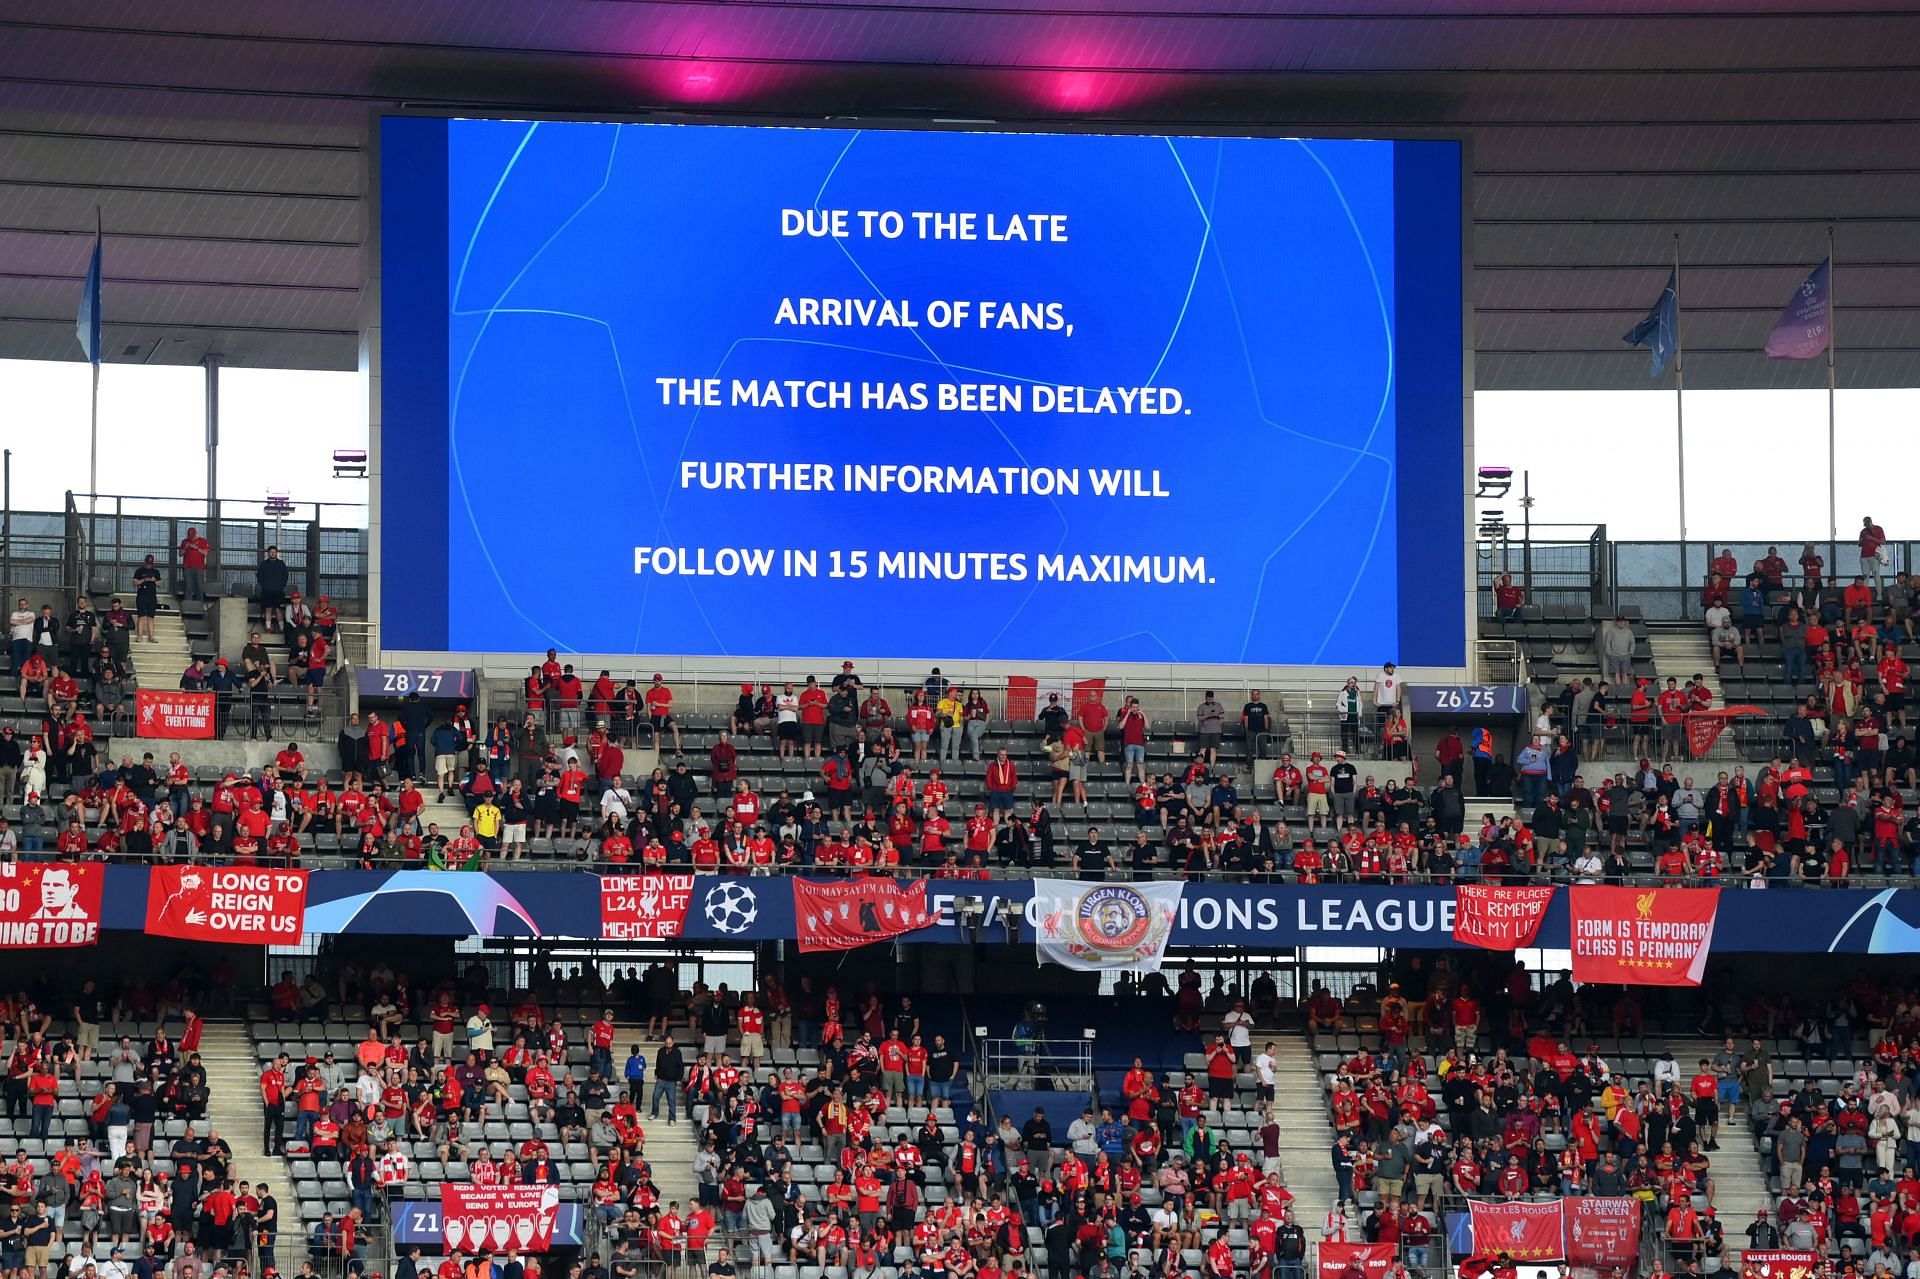 The final was delayed firstly by 15 minutes.